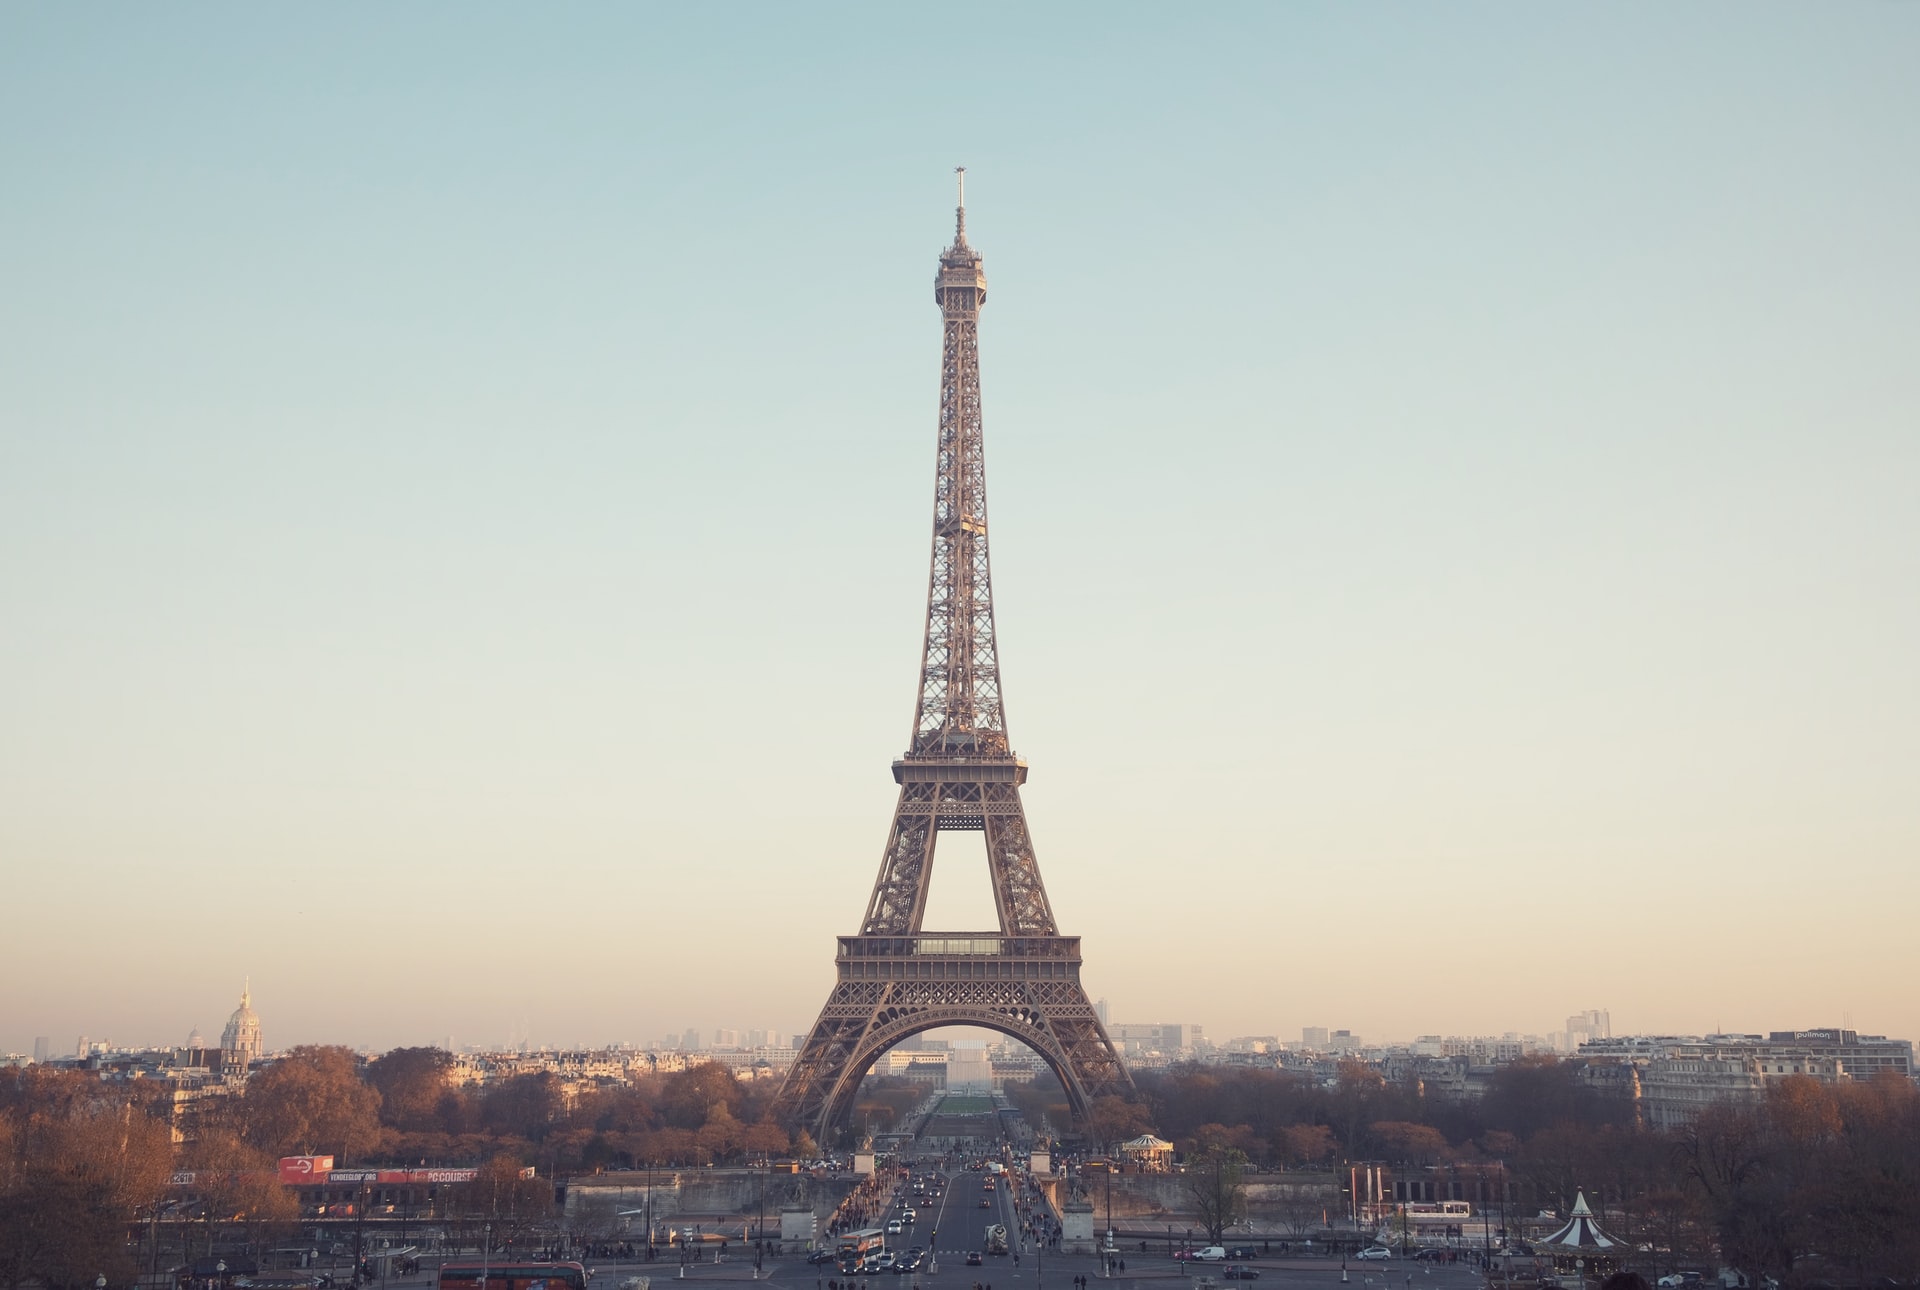 Best Views of the Eiffel Tower: 6 Top Spots for Photo